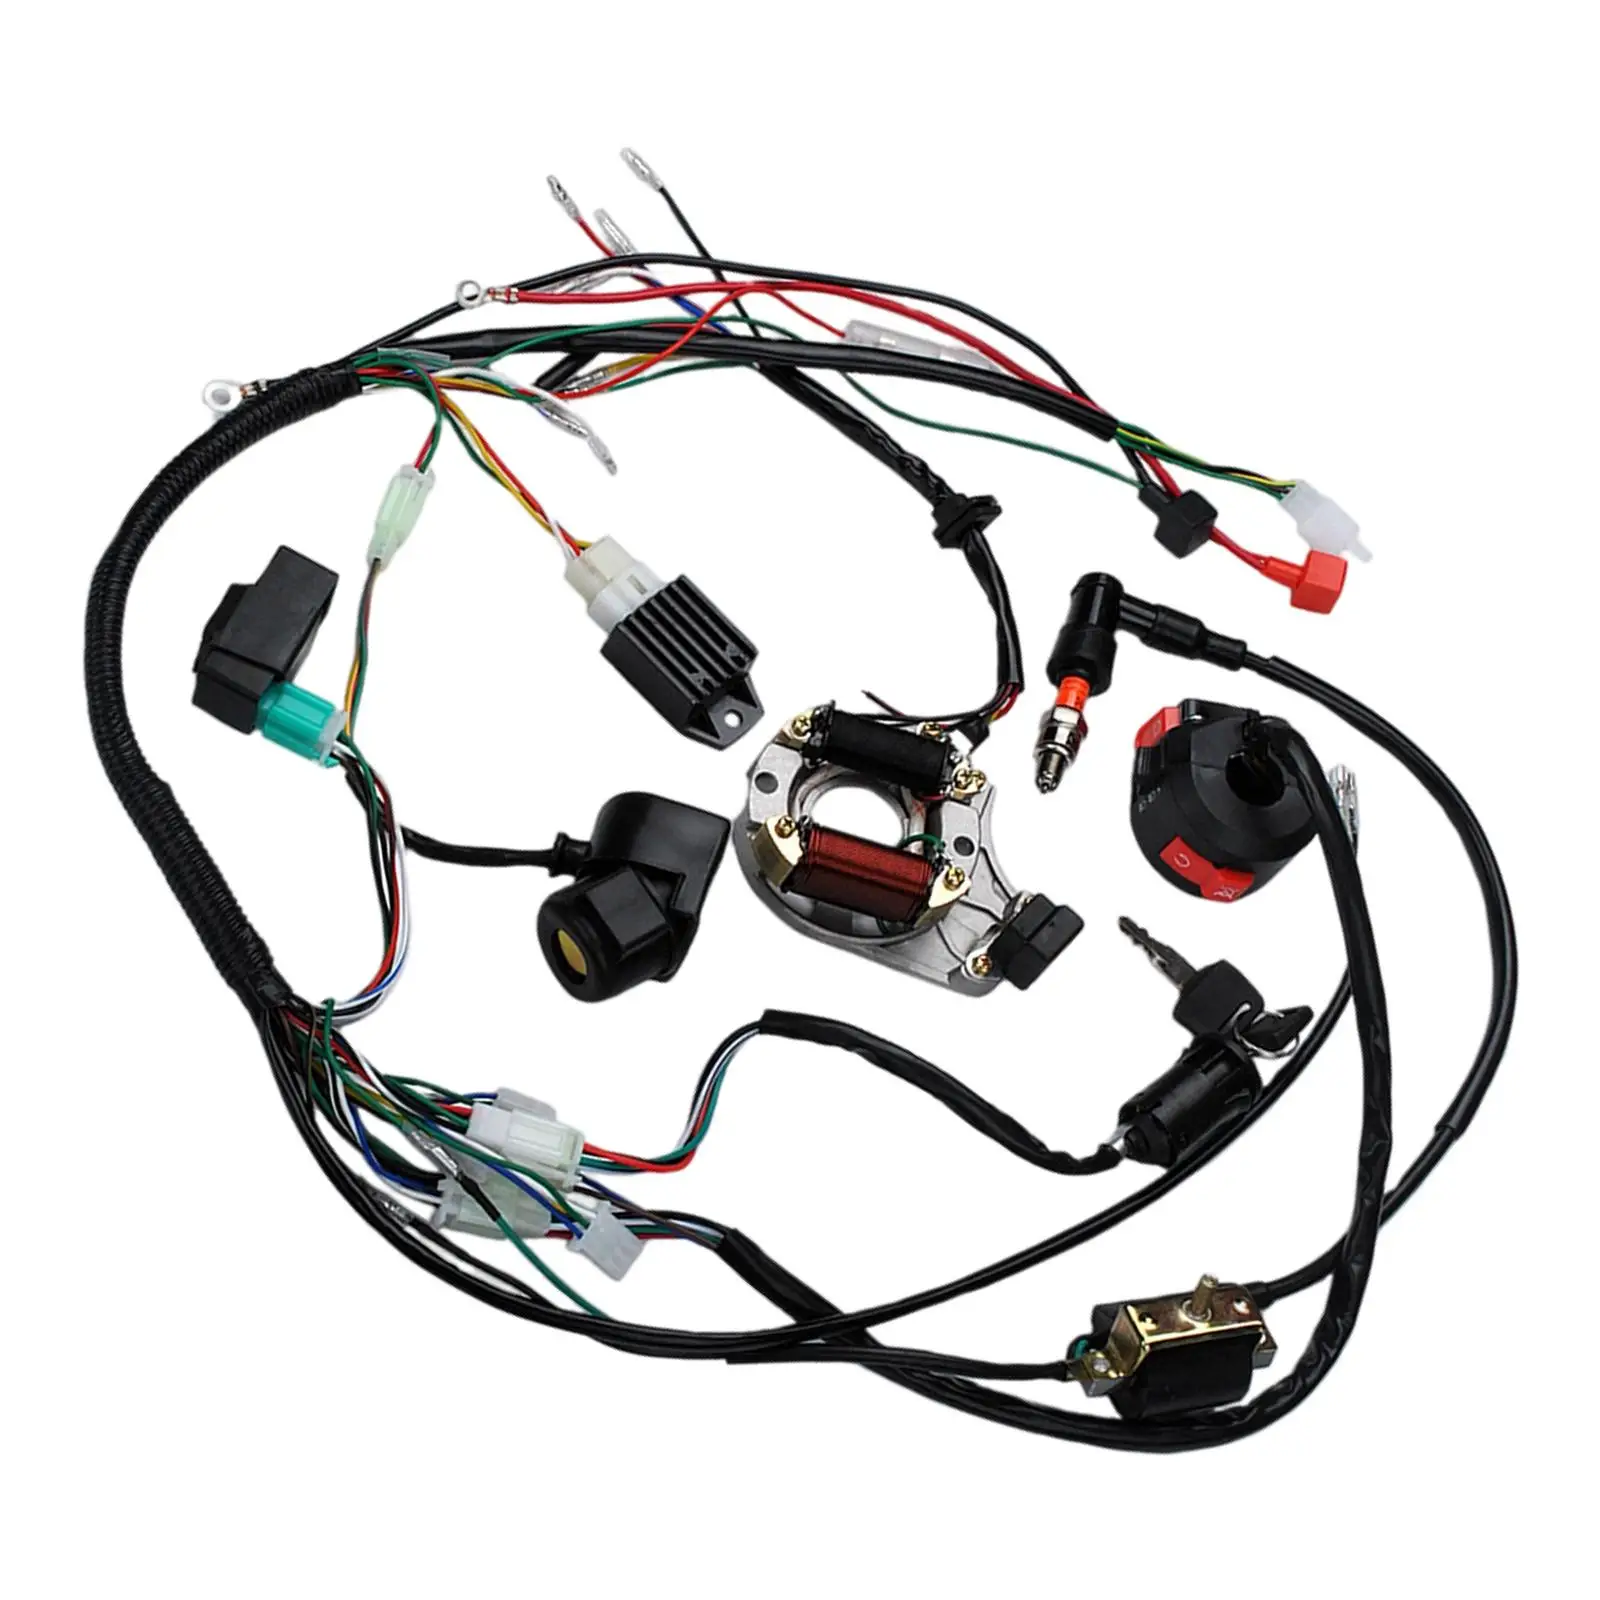 1Set Full Complete Electrics Wiring Harness Coil Solenoid Relay Cdi for Dirt Bike 4 Wheelers Stroke Buggy Quad Scooter